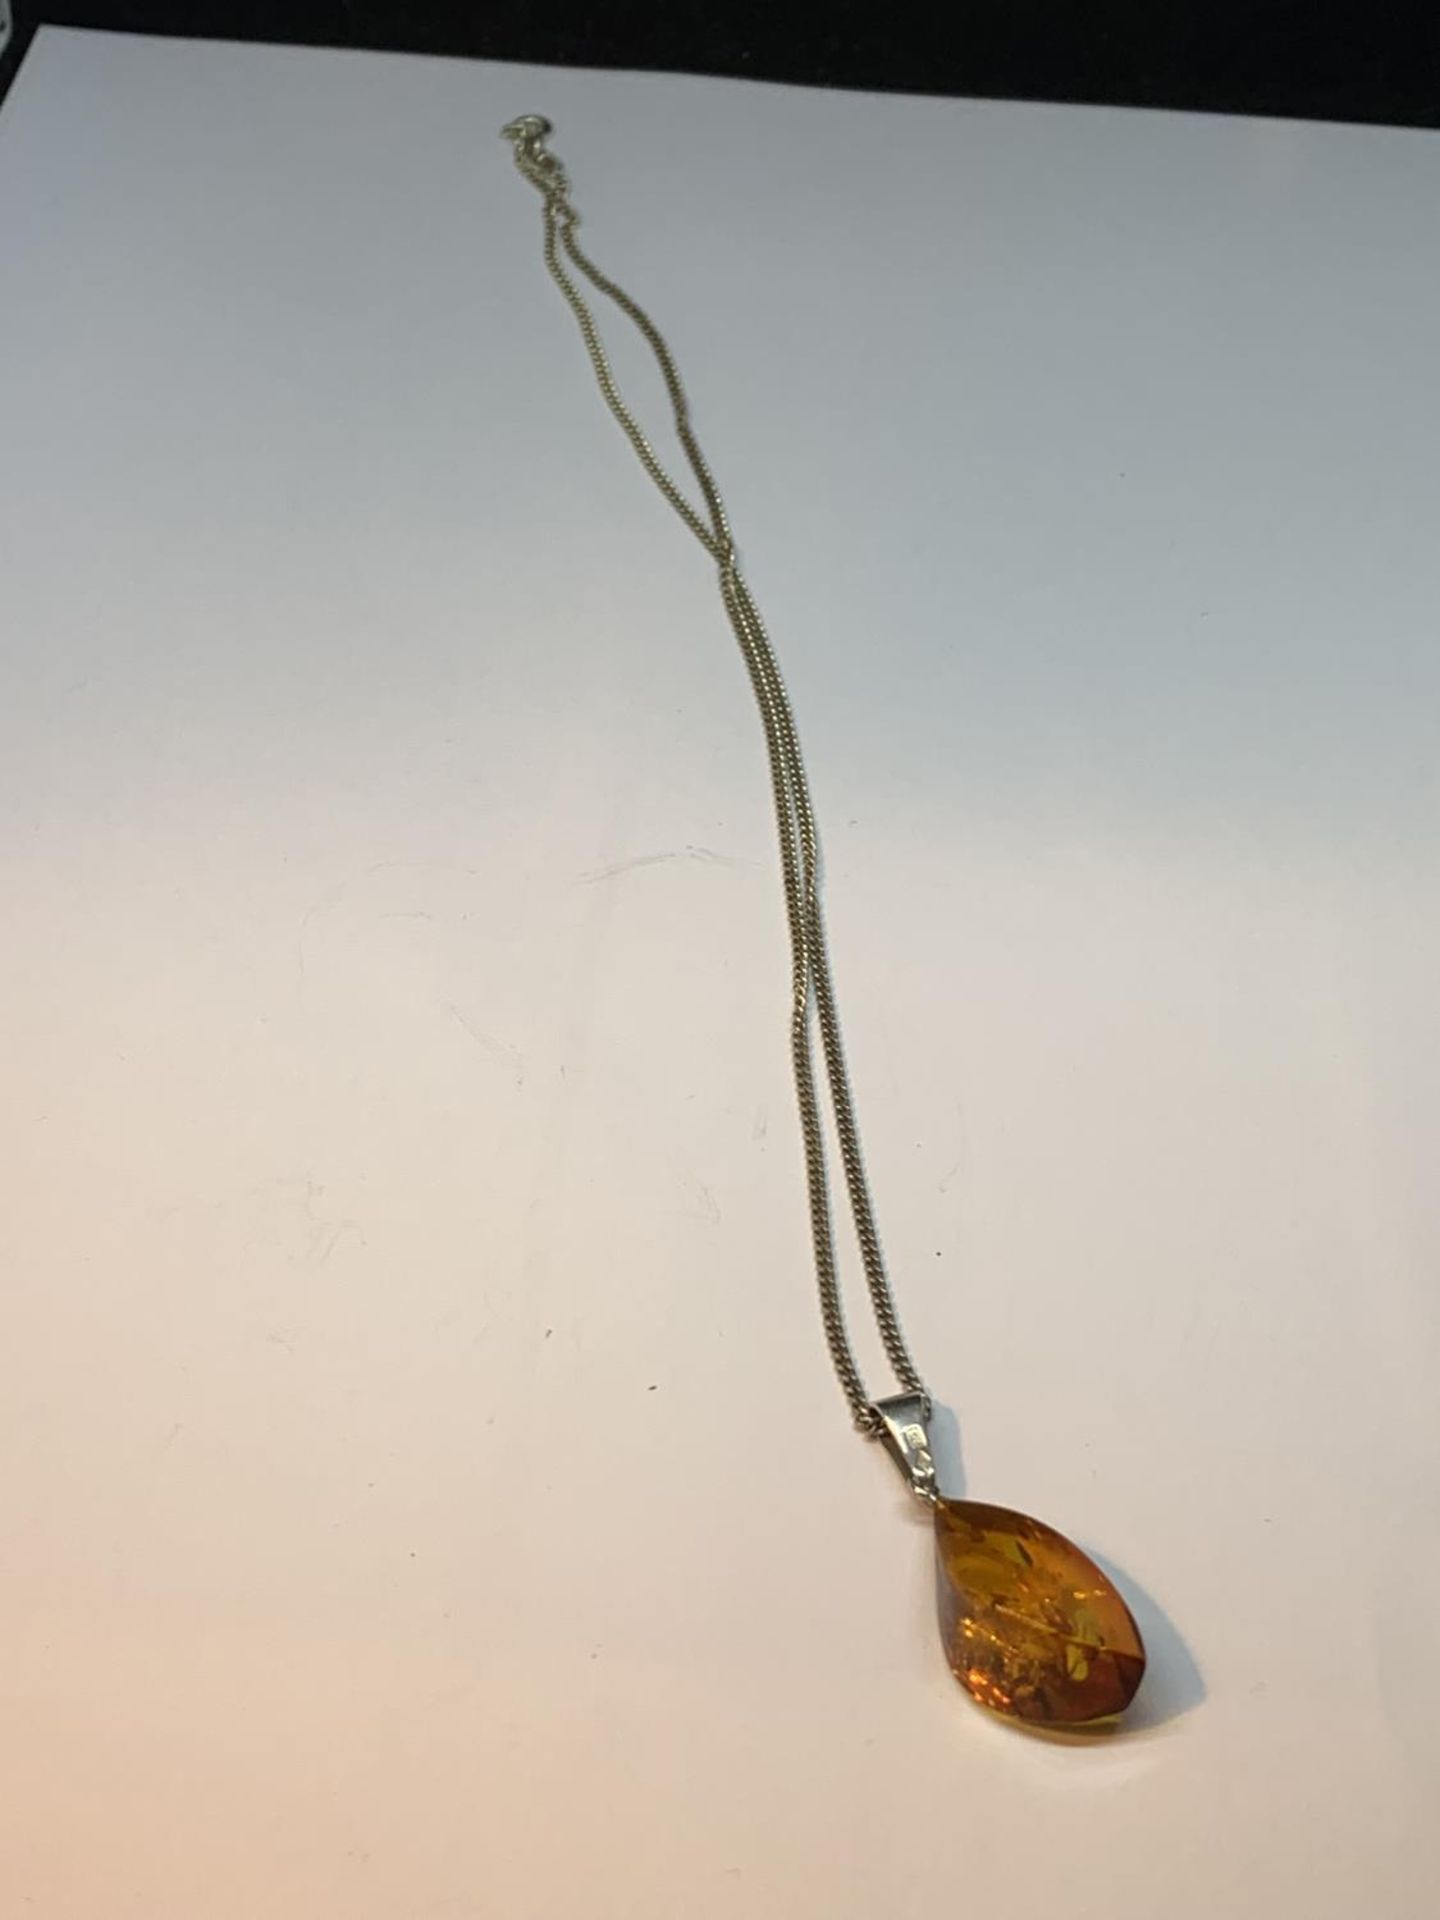 A DECORATIVE SILVER BANGLE WITH A LARGE CENTRAL AMBER STONE AND AN AMBER DROP ON A SILVER CHAIN IN A - Image 3 of 4